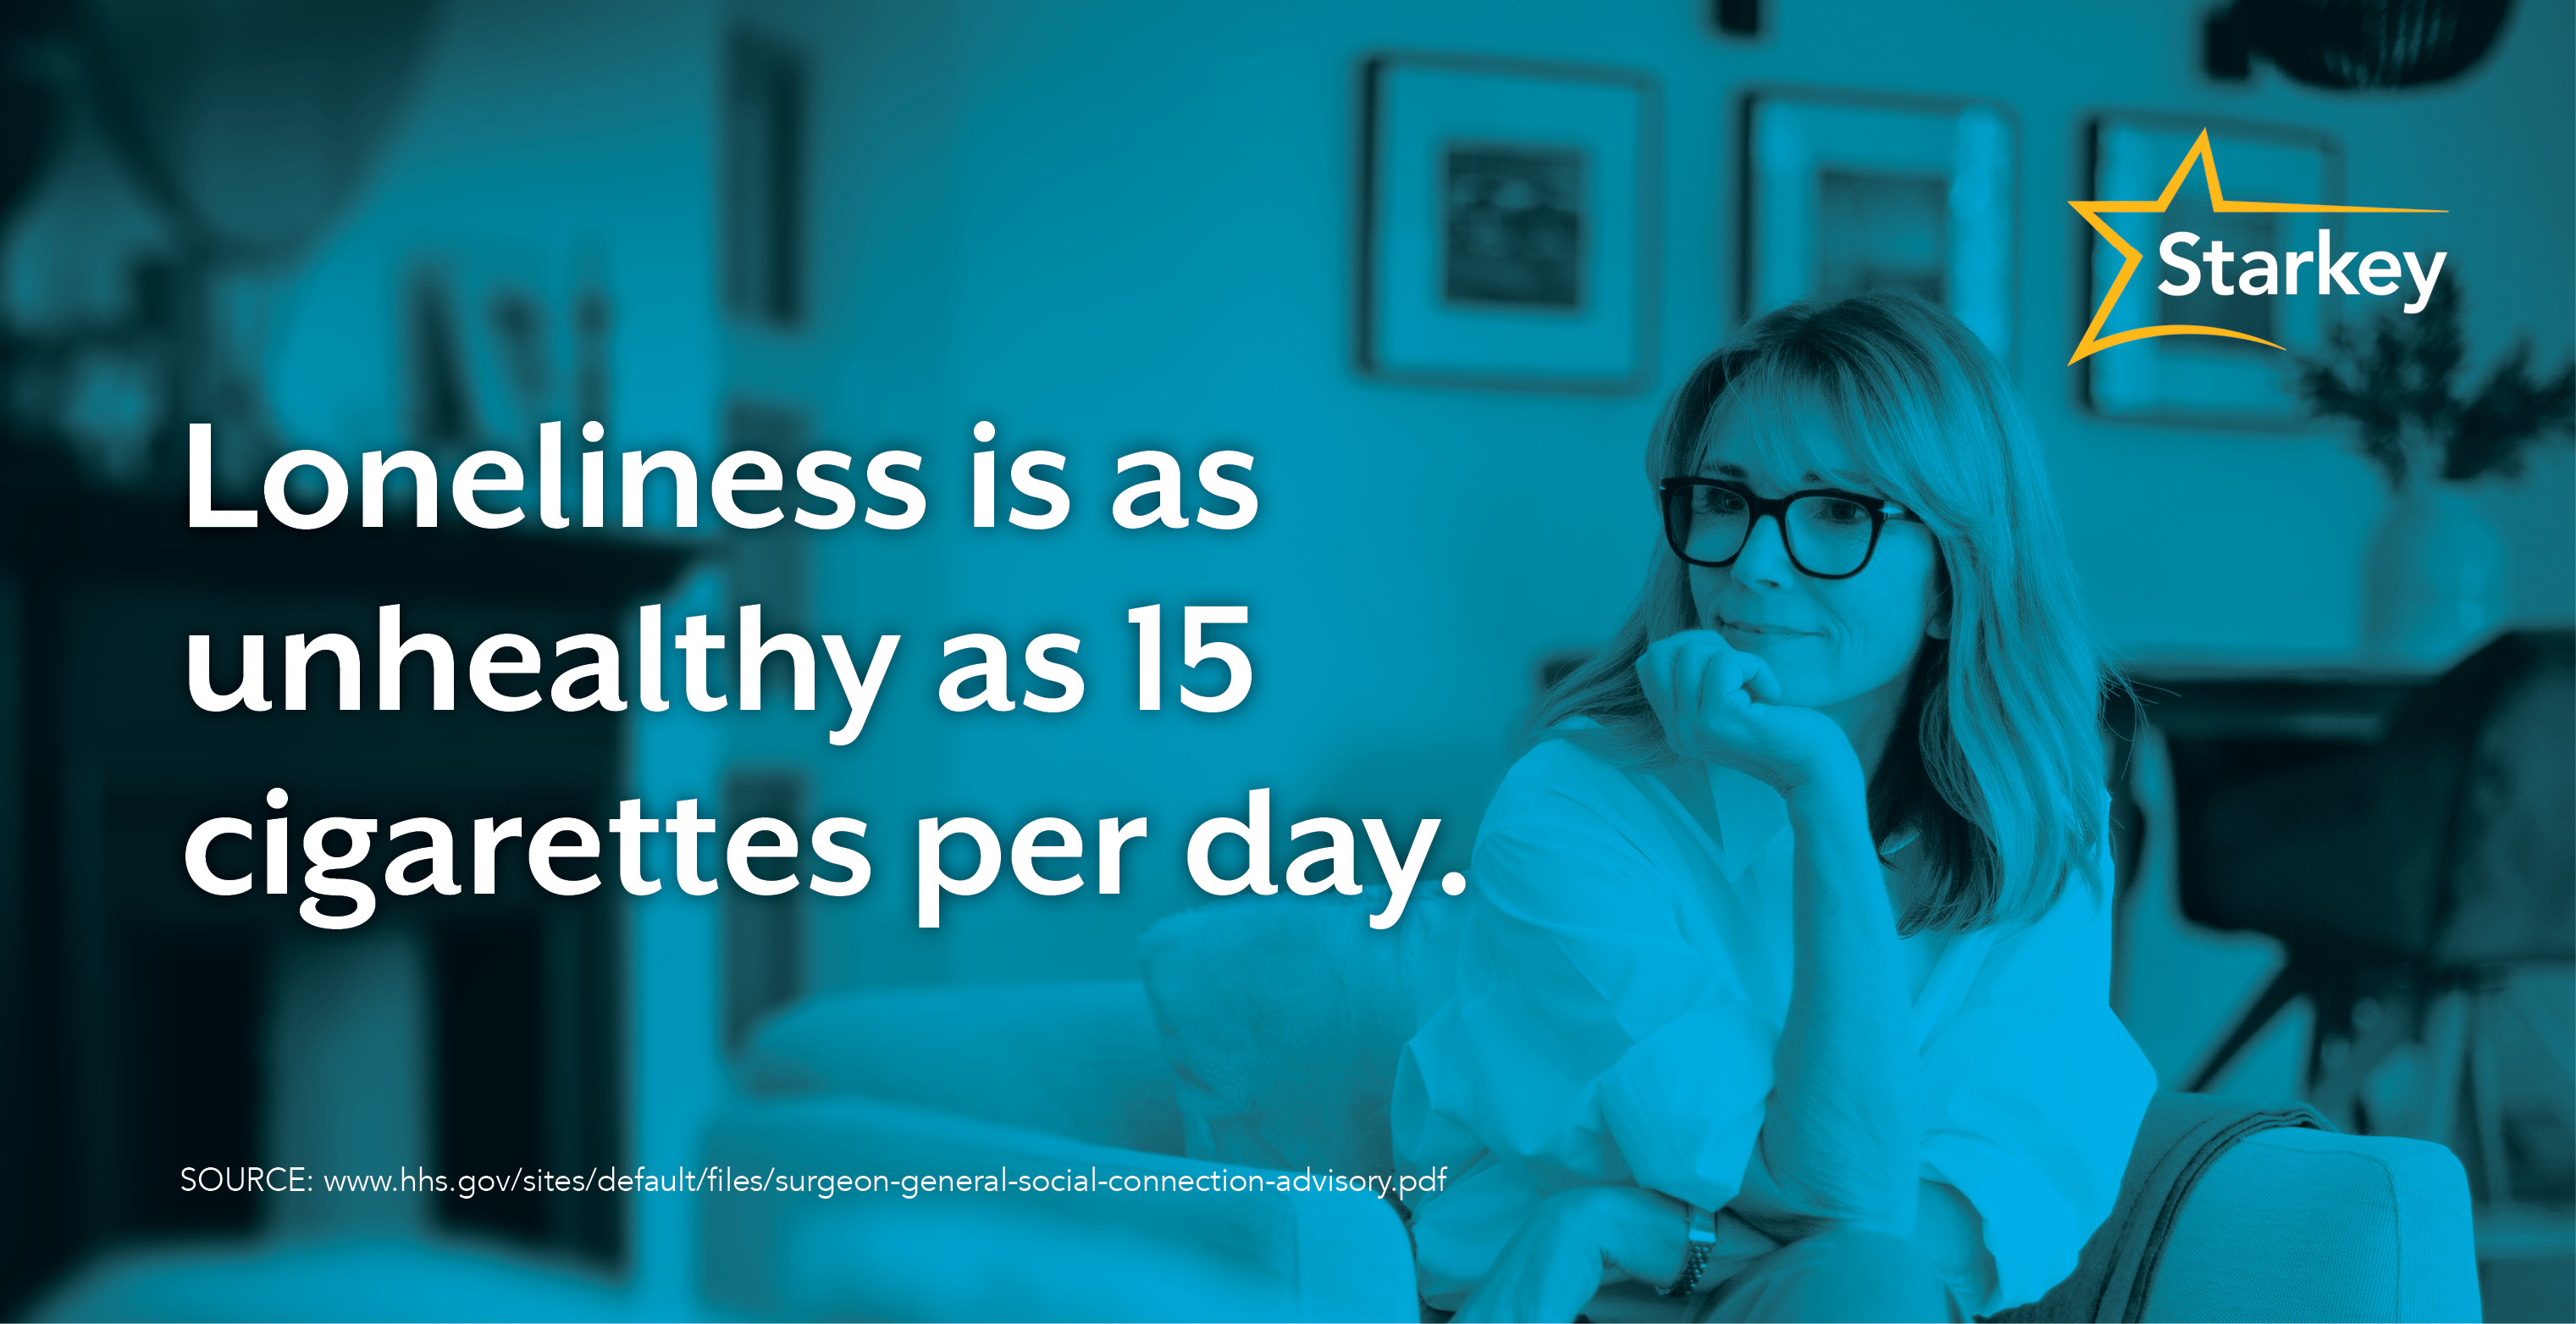 Image of woman alone in a room beside text that reads, "Loneliness is as unhealthy as 15 cigarettes per day."